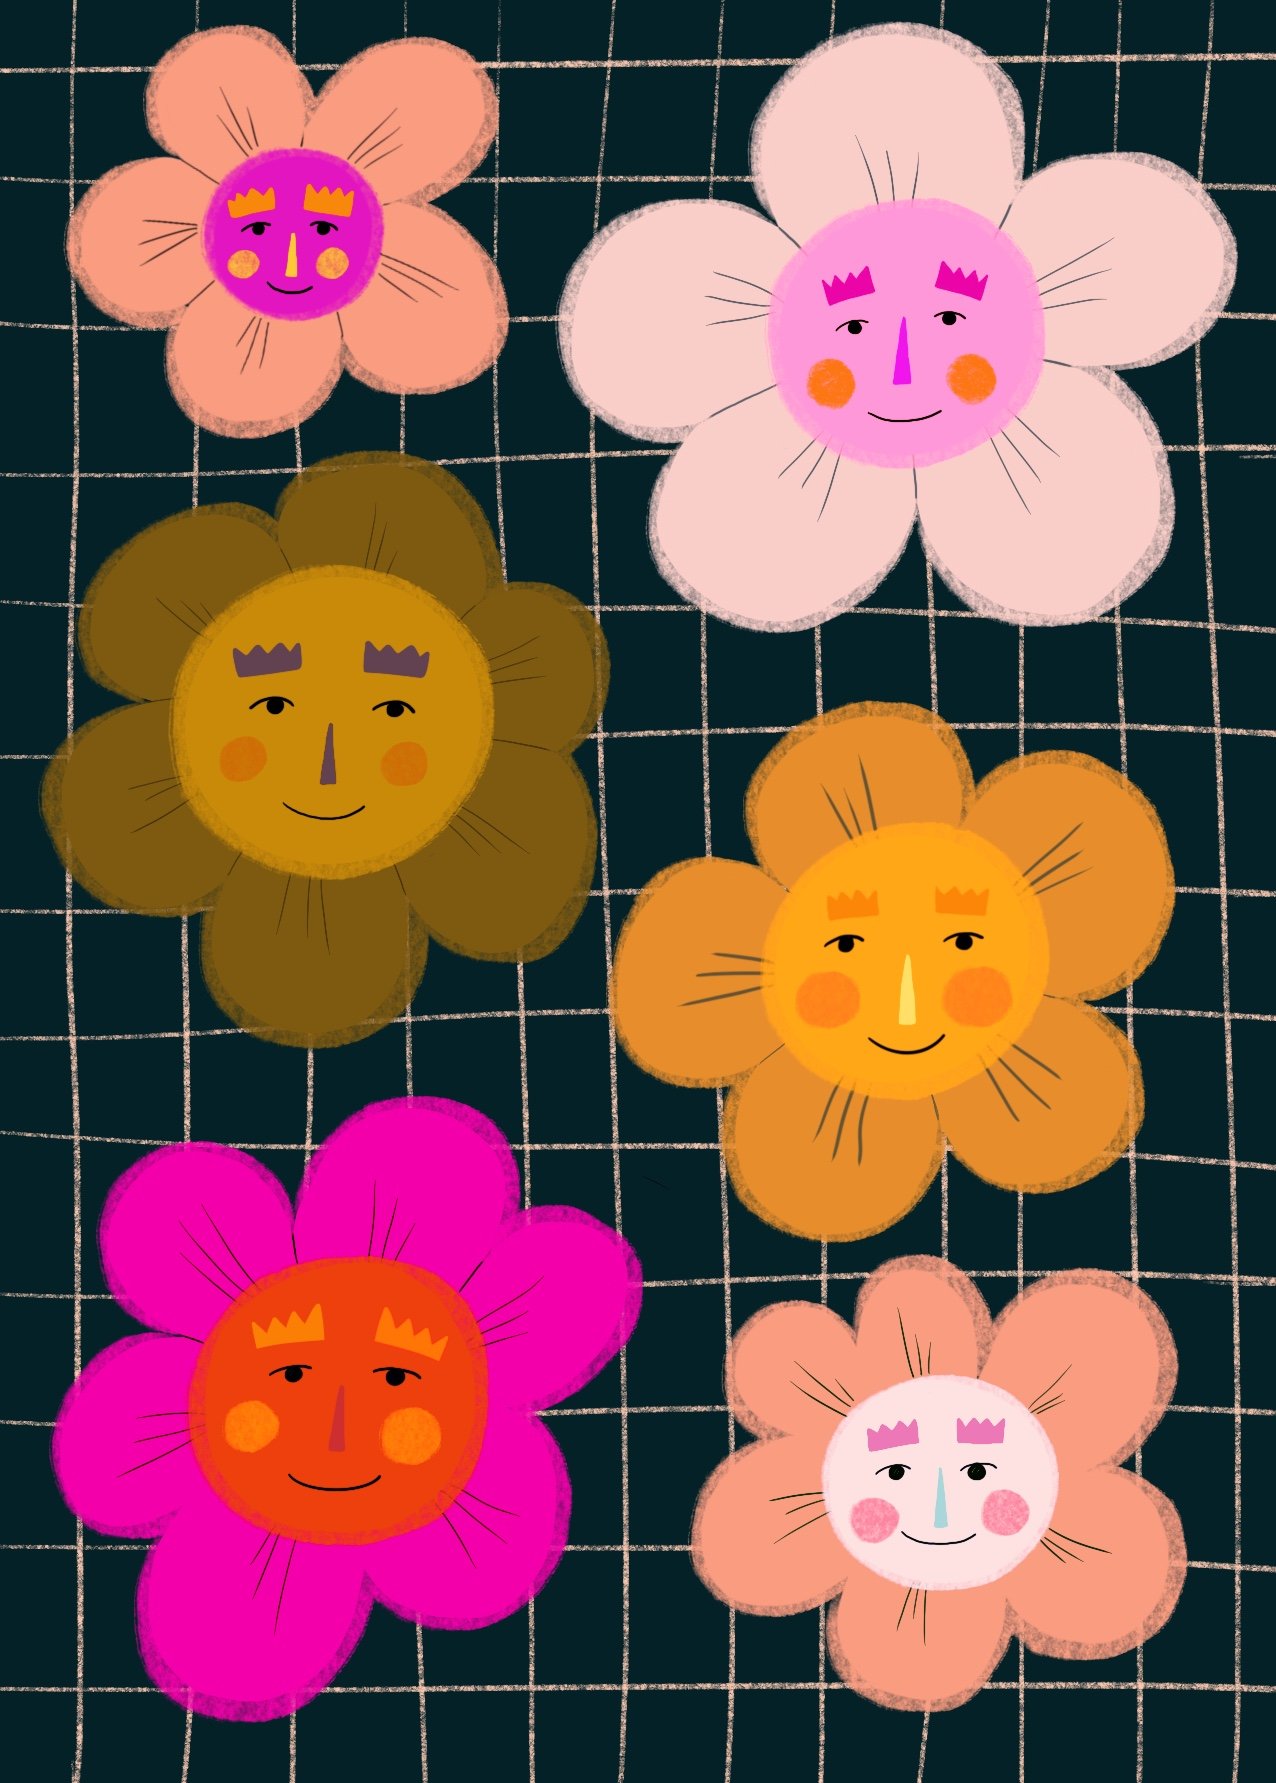 Flowery Faces Illustration Project, 2023